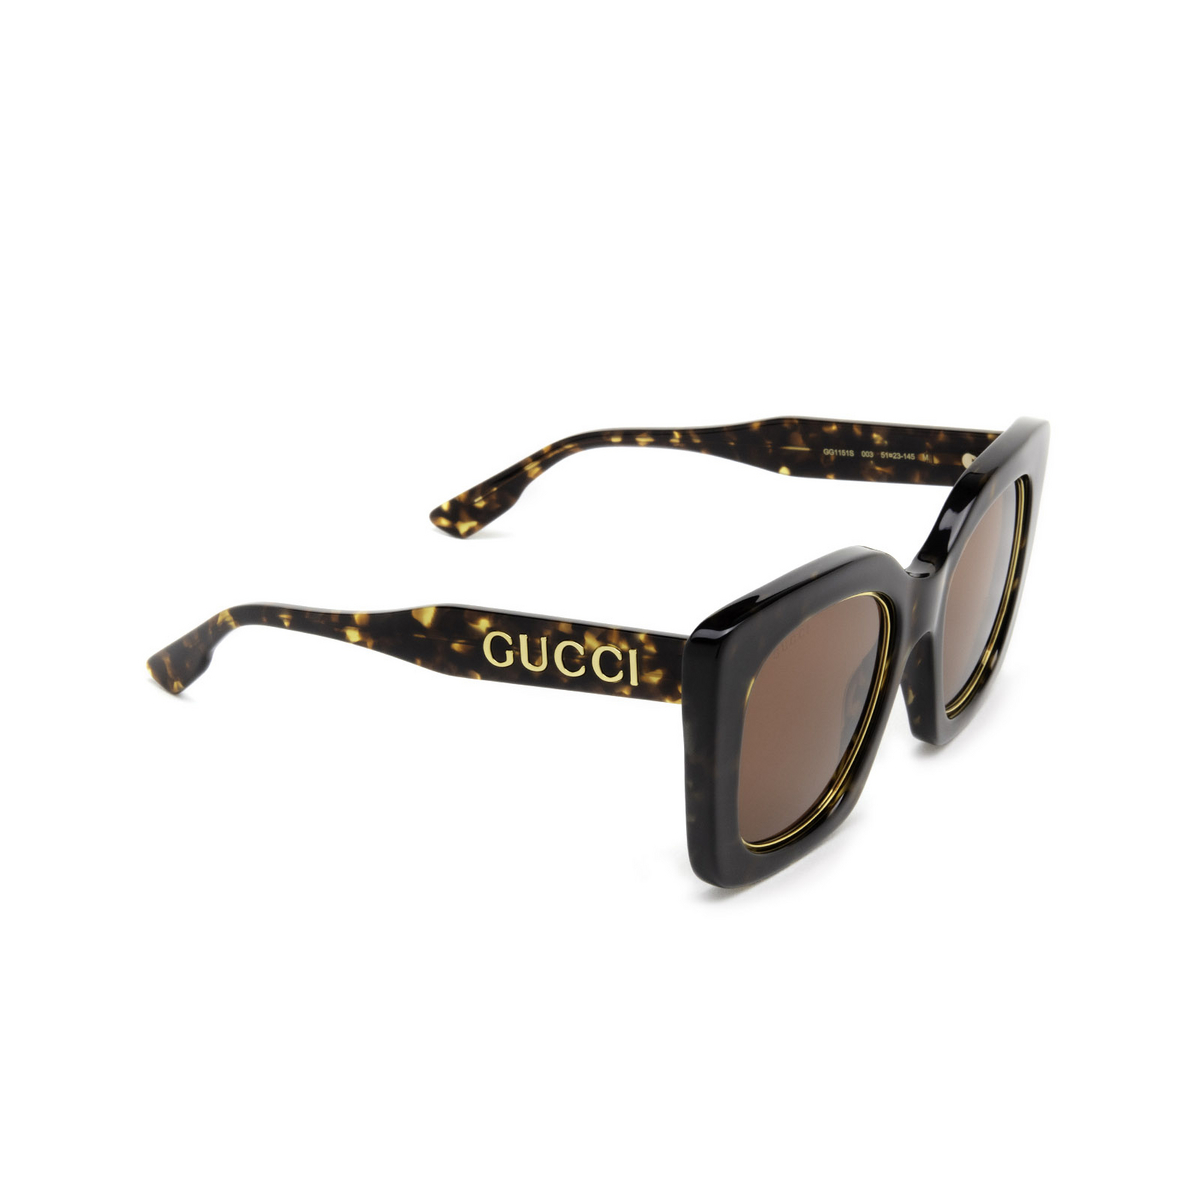 Gucci® Butterfly Sunglasses: GG1151S color Havana 003 - three-quarters view.